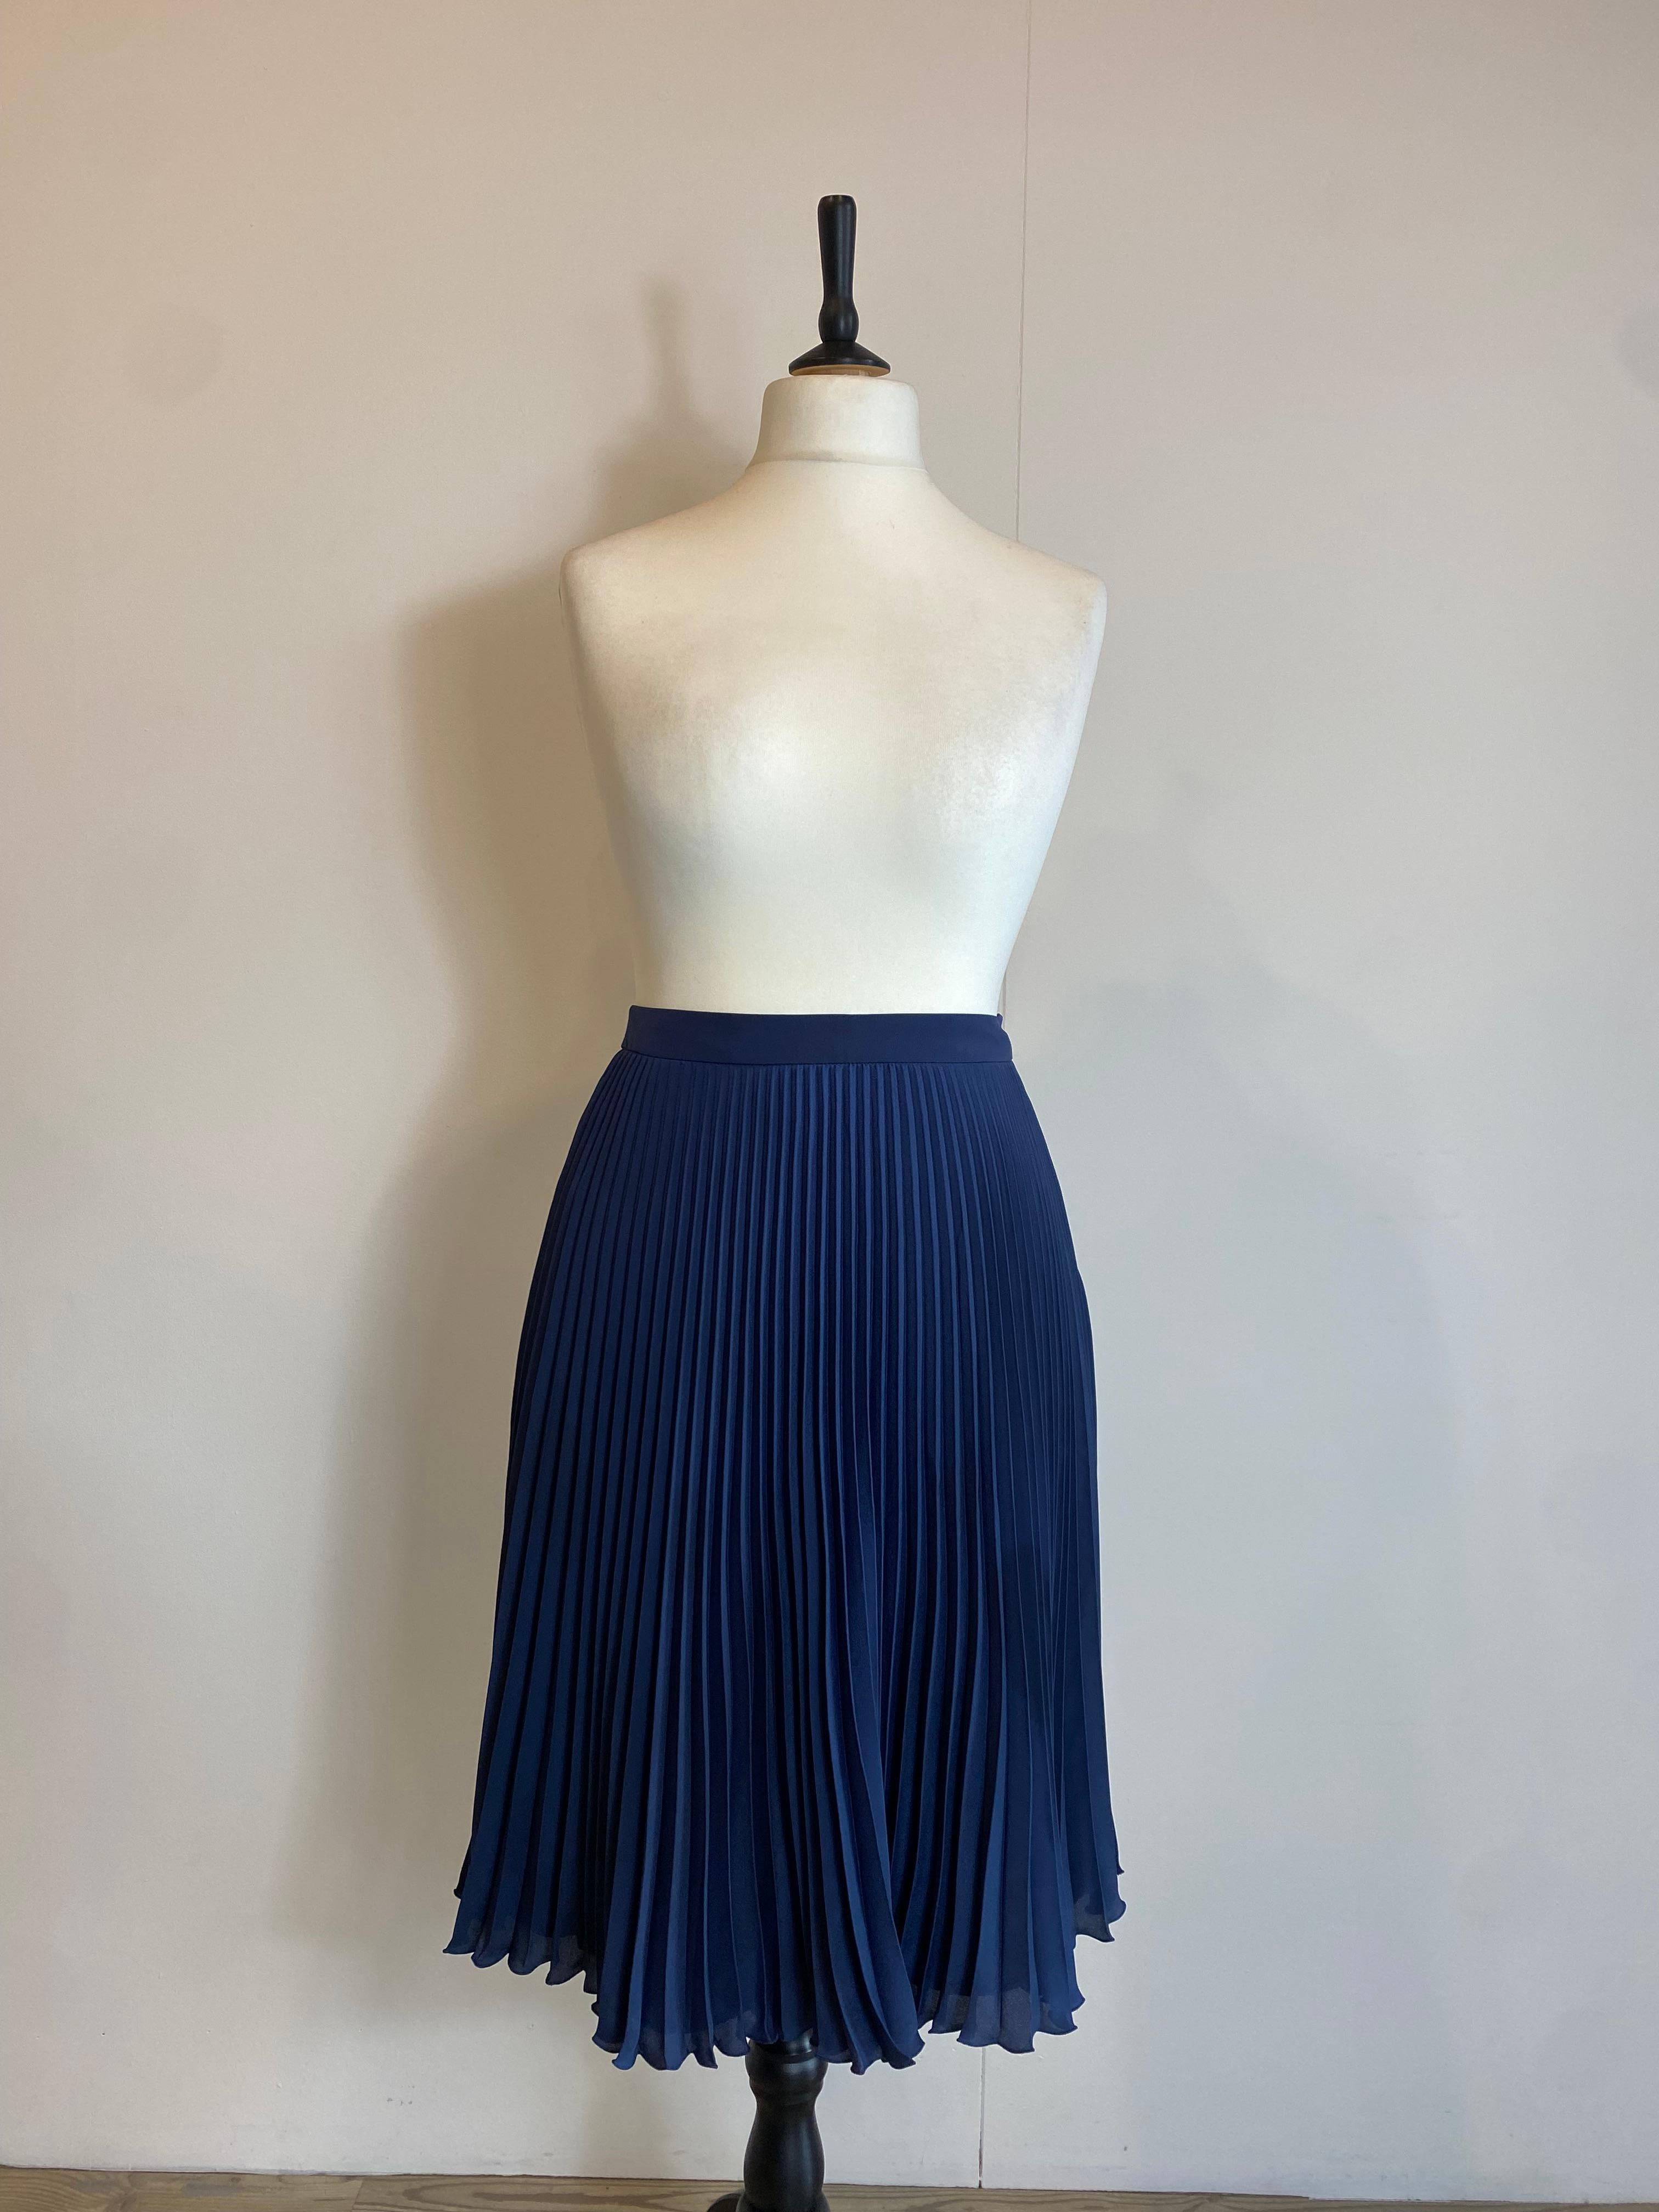 Prada skirt. 
Navy blue color, pleated. Composition label missing but we think it is silk. Lined. Side zipper closure. Italian size 40 but fits larger. Waist 36 cm Length 62 cm 
Excellent general condition, used very little